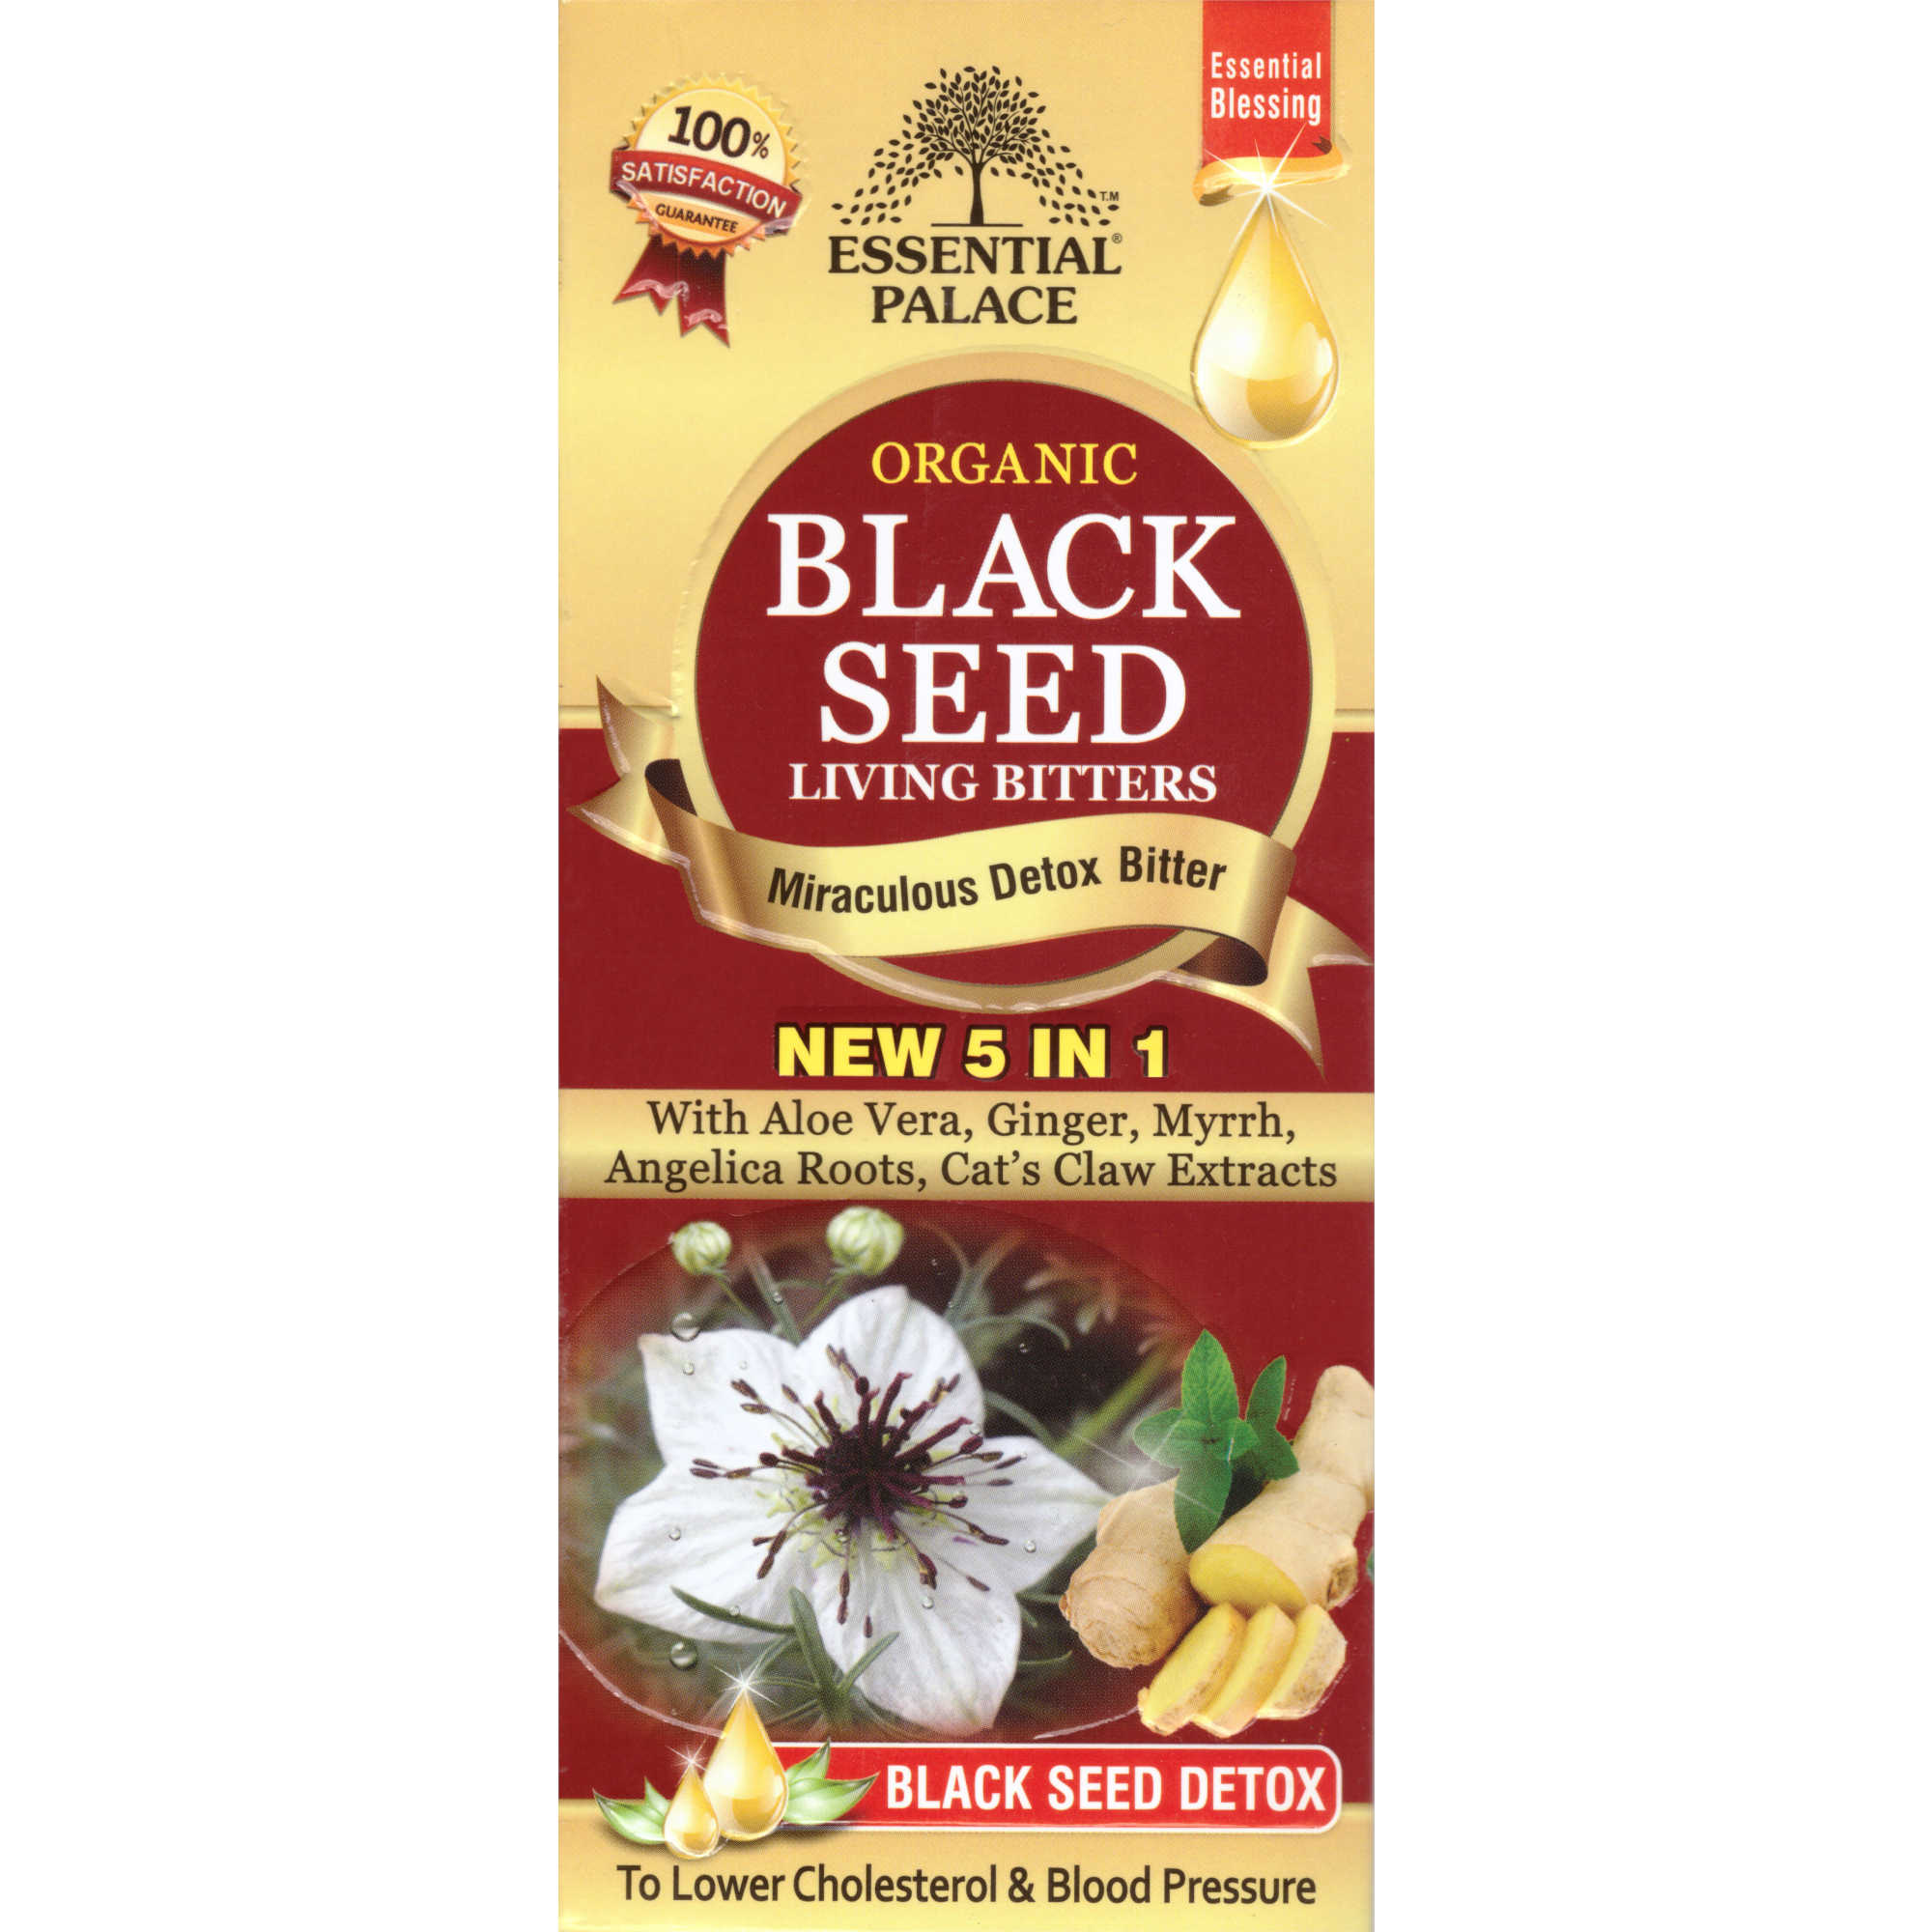 Essential Palace Organic Black Seed Living Bitters 5 IN 1 16 OZ Front 1